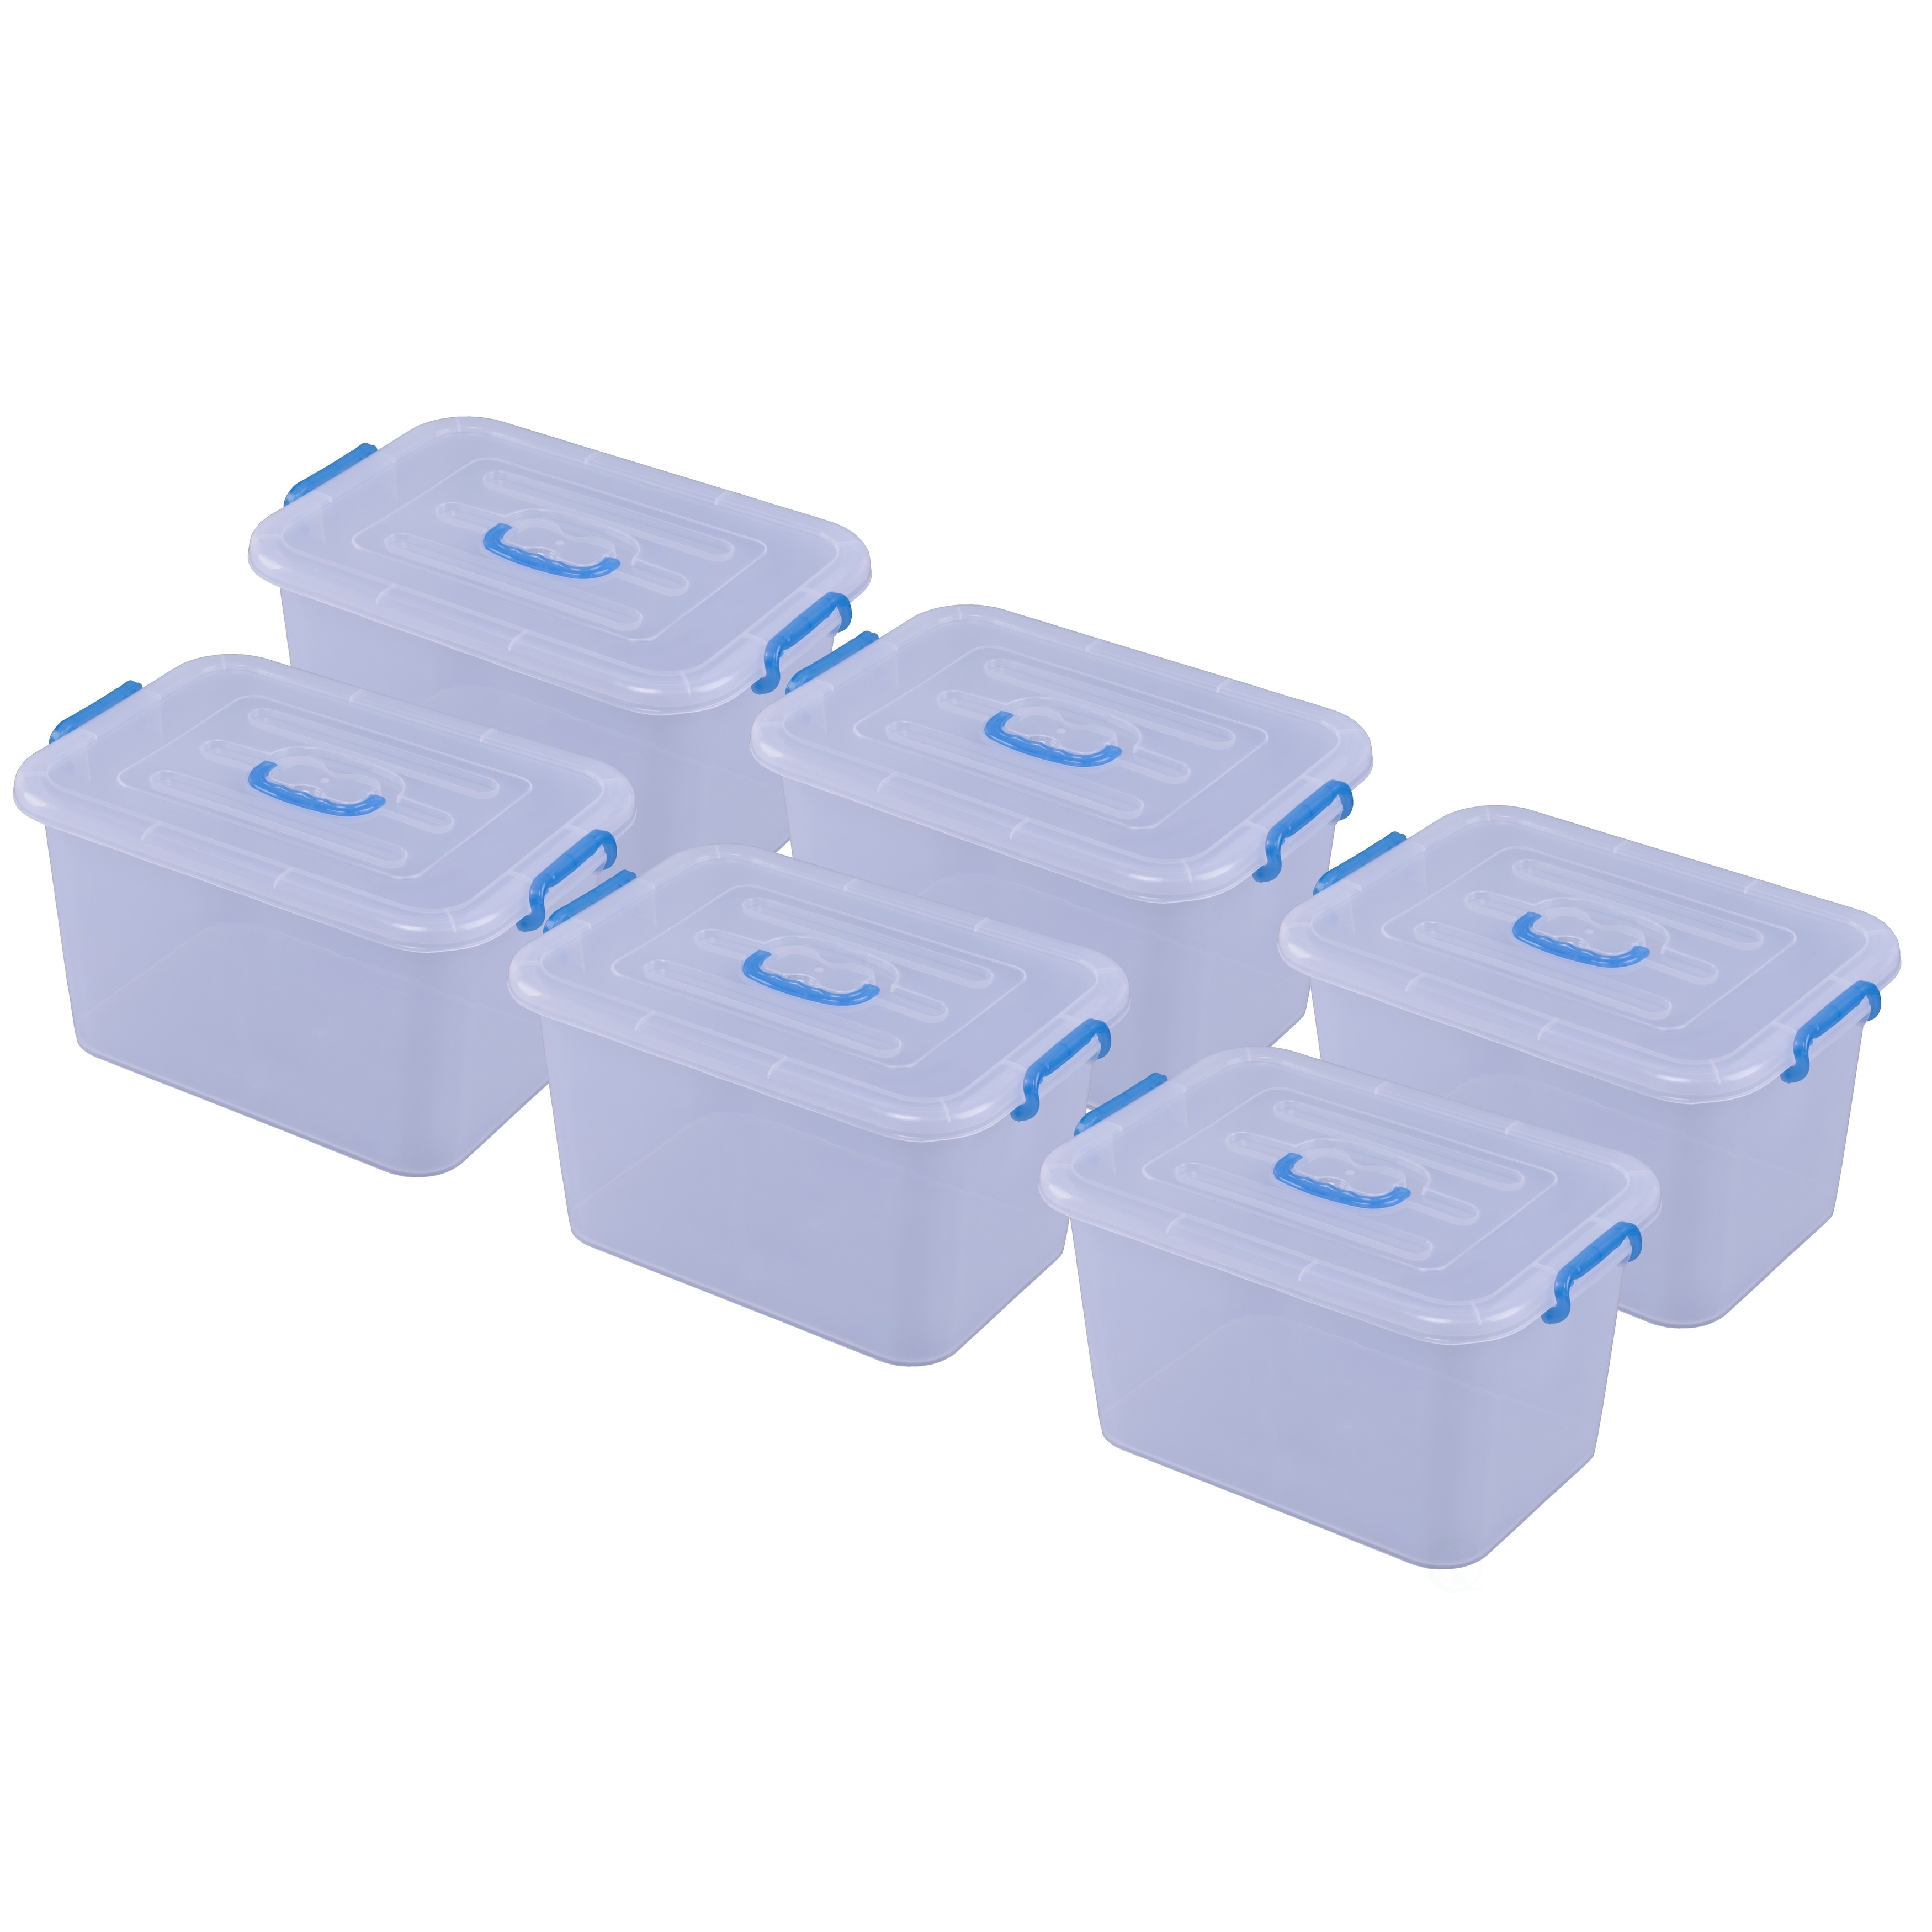 Basicwise Large Clear Storage Container With Lid and Handles, Set of 3